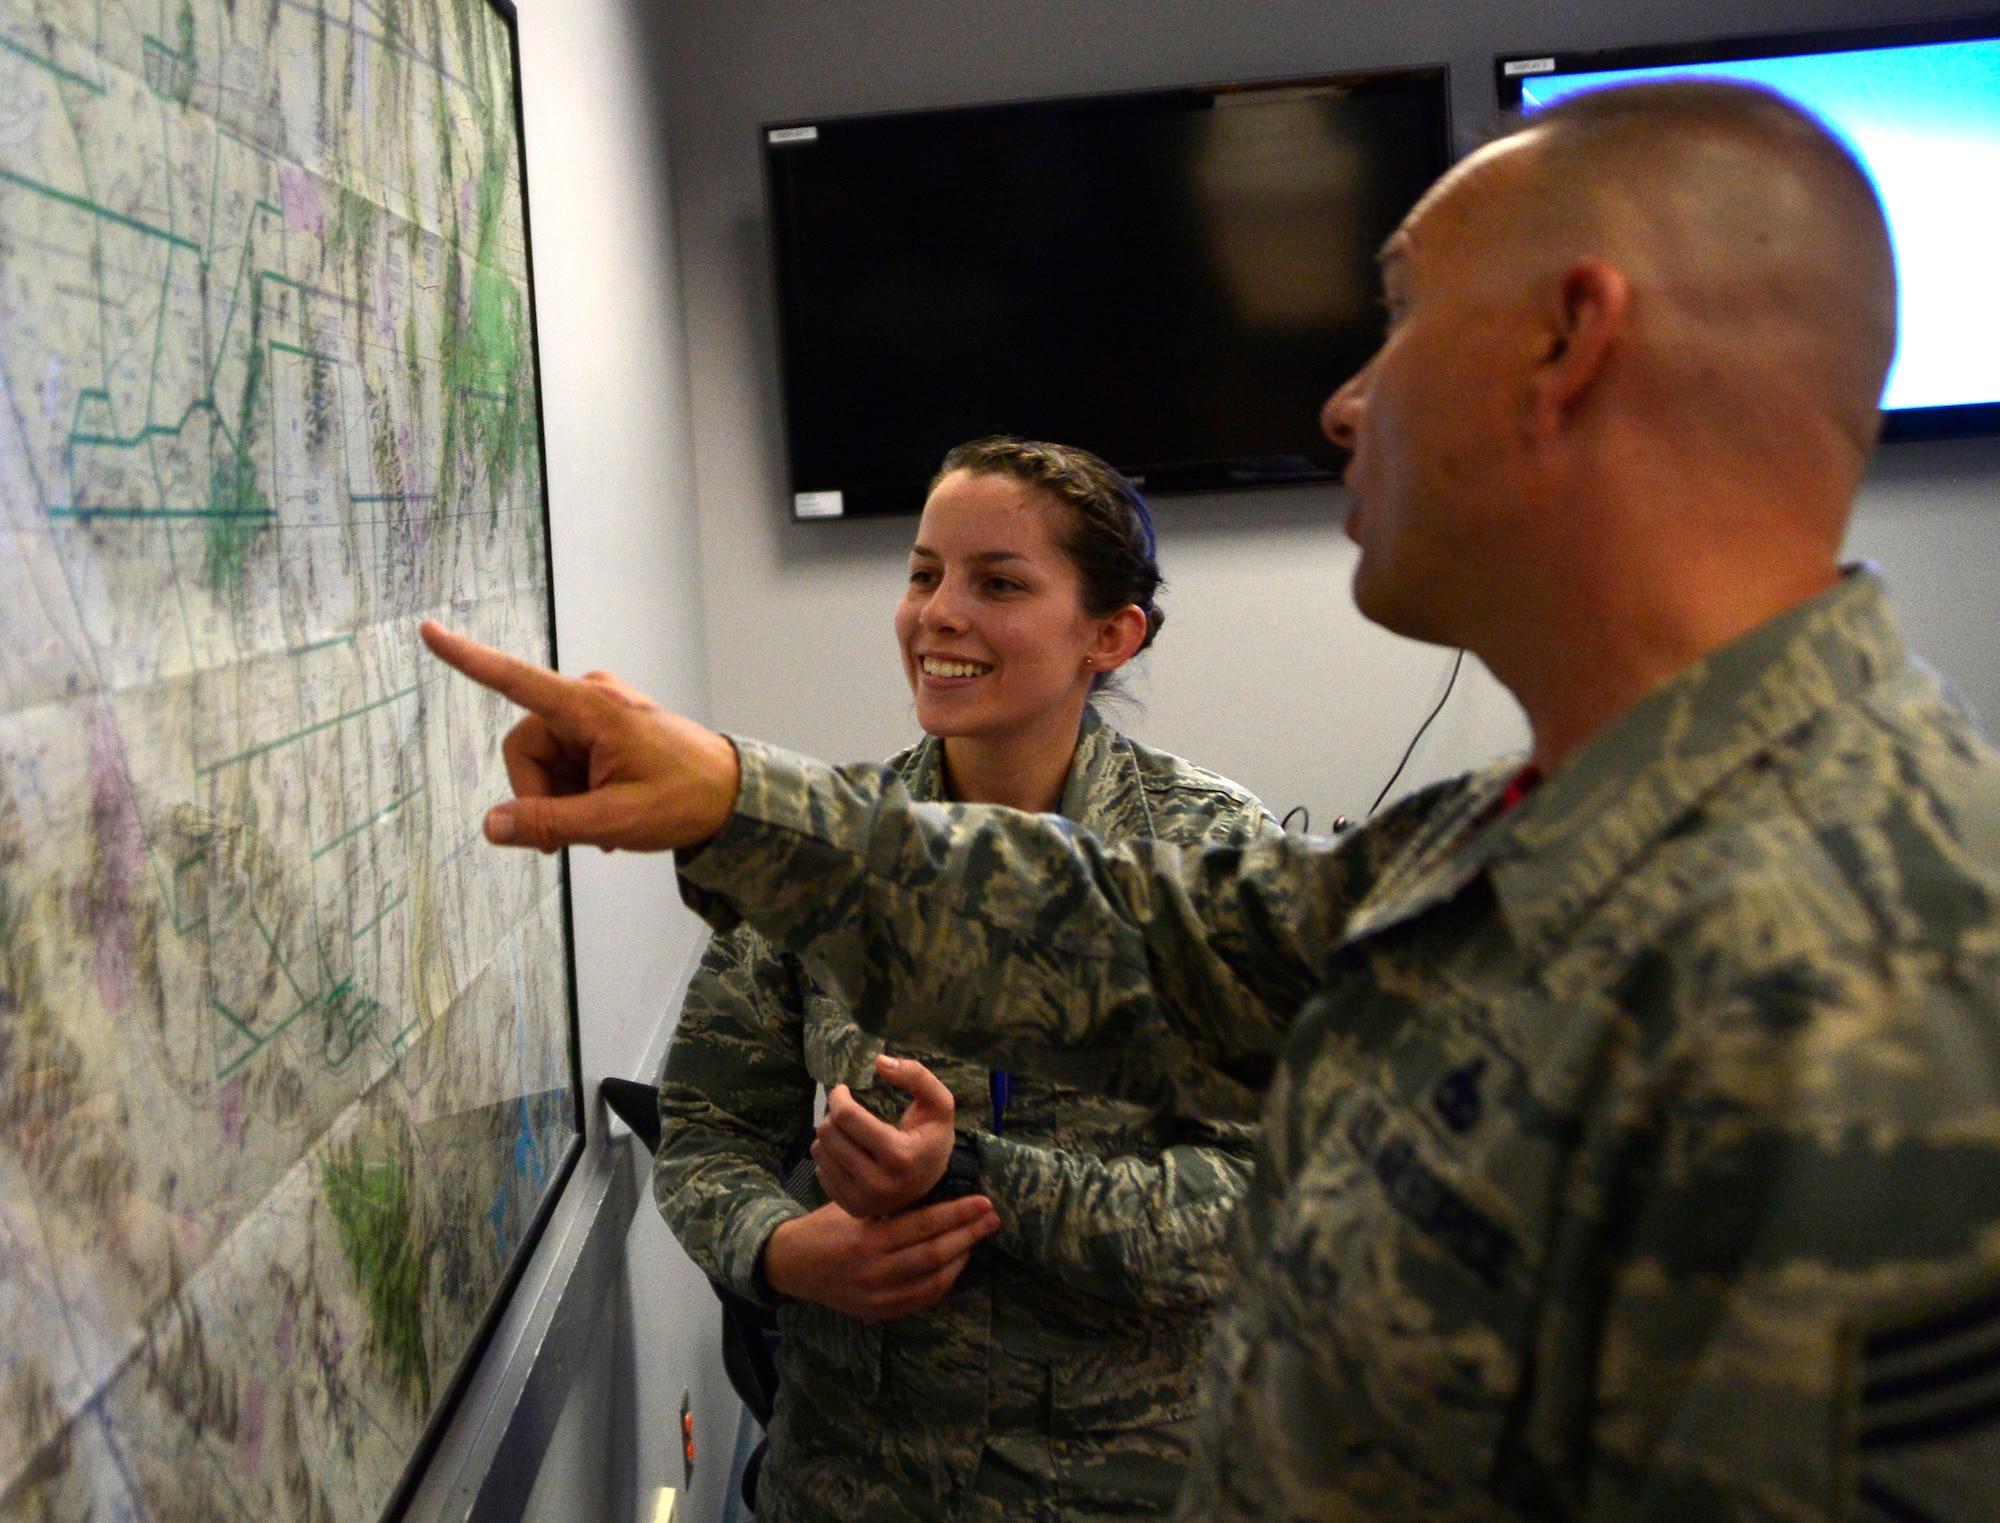 Senior Airman Nicole, 22nd Reconnaissance Squadron mission support analyst (MSA), explains how MSAs use maps to collect information needed for pre-flight briefings to Chief Master Sgt. Michael Ditore, 432nd Wing/432nd Air Expeditionary Wing command chief April 1, 2016 at Creech Air Force Base, Nevada. Nicole explained how the chief actively listened, asked questions and really cared about what the Airmen do for the mission and how they're doing in their personal lives. (U.S. Air Force photo by Senior Airman Christian Clausen/Released)